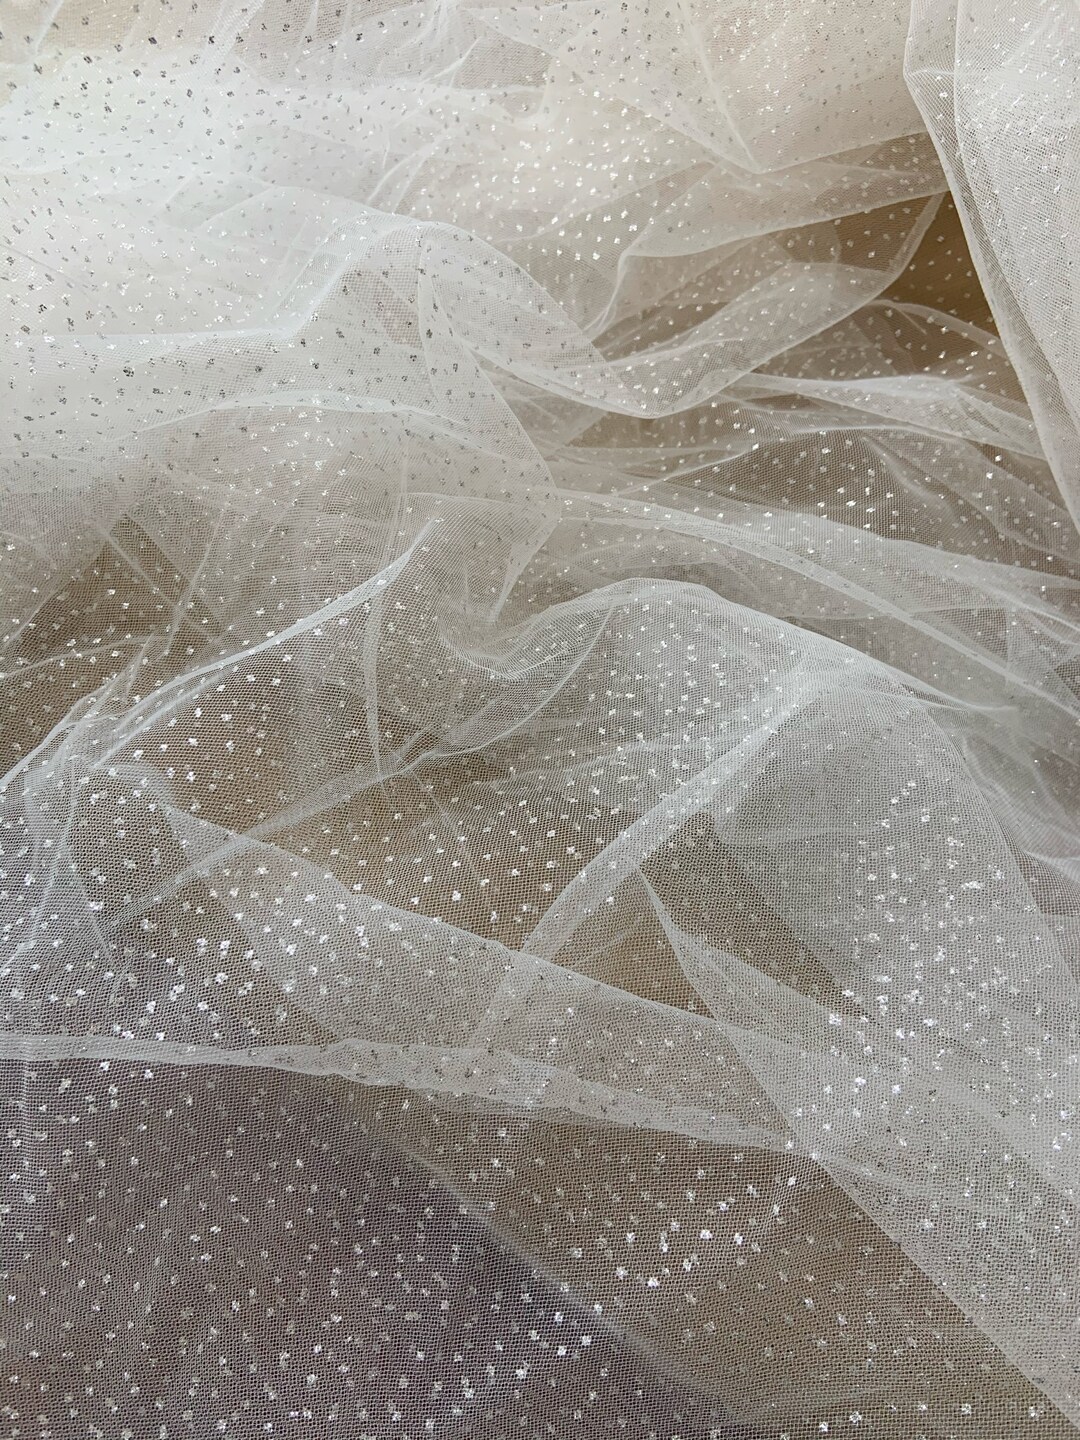 Off White Tulle Fabric With Glitters for Dress Costume Dance - Etsy